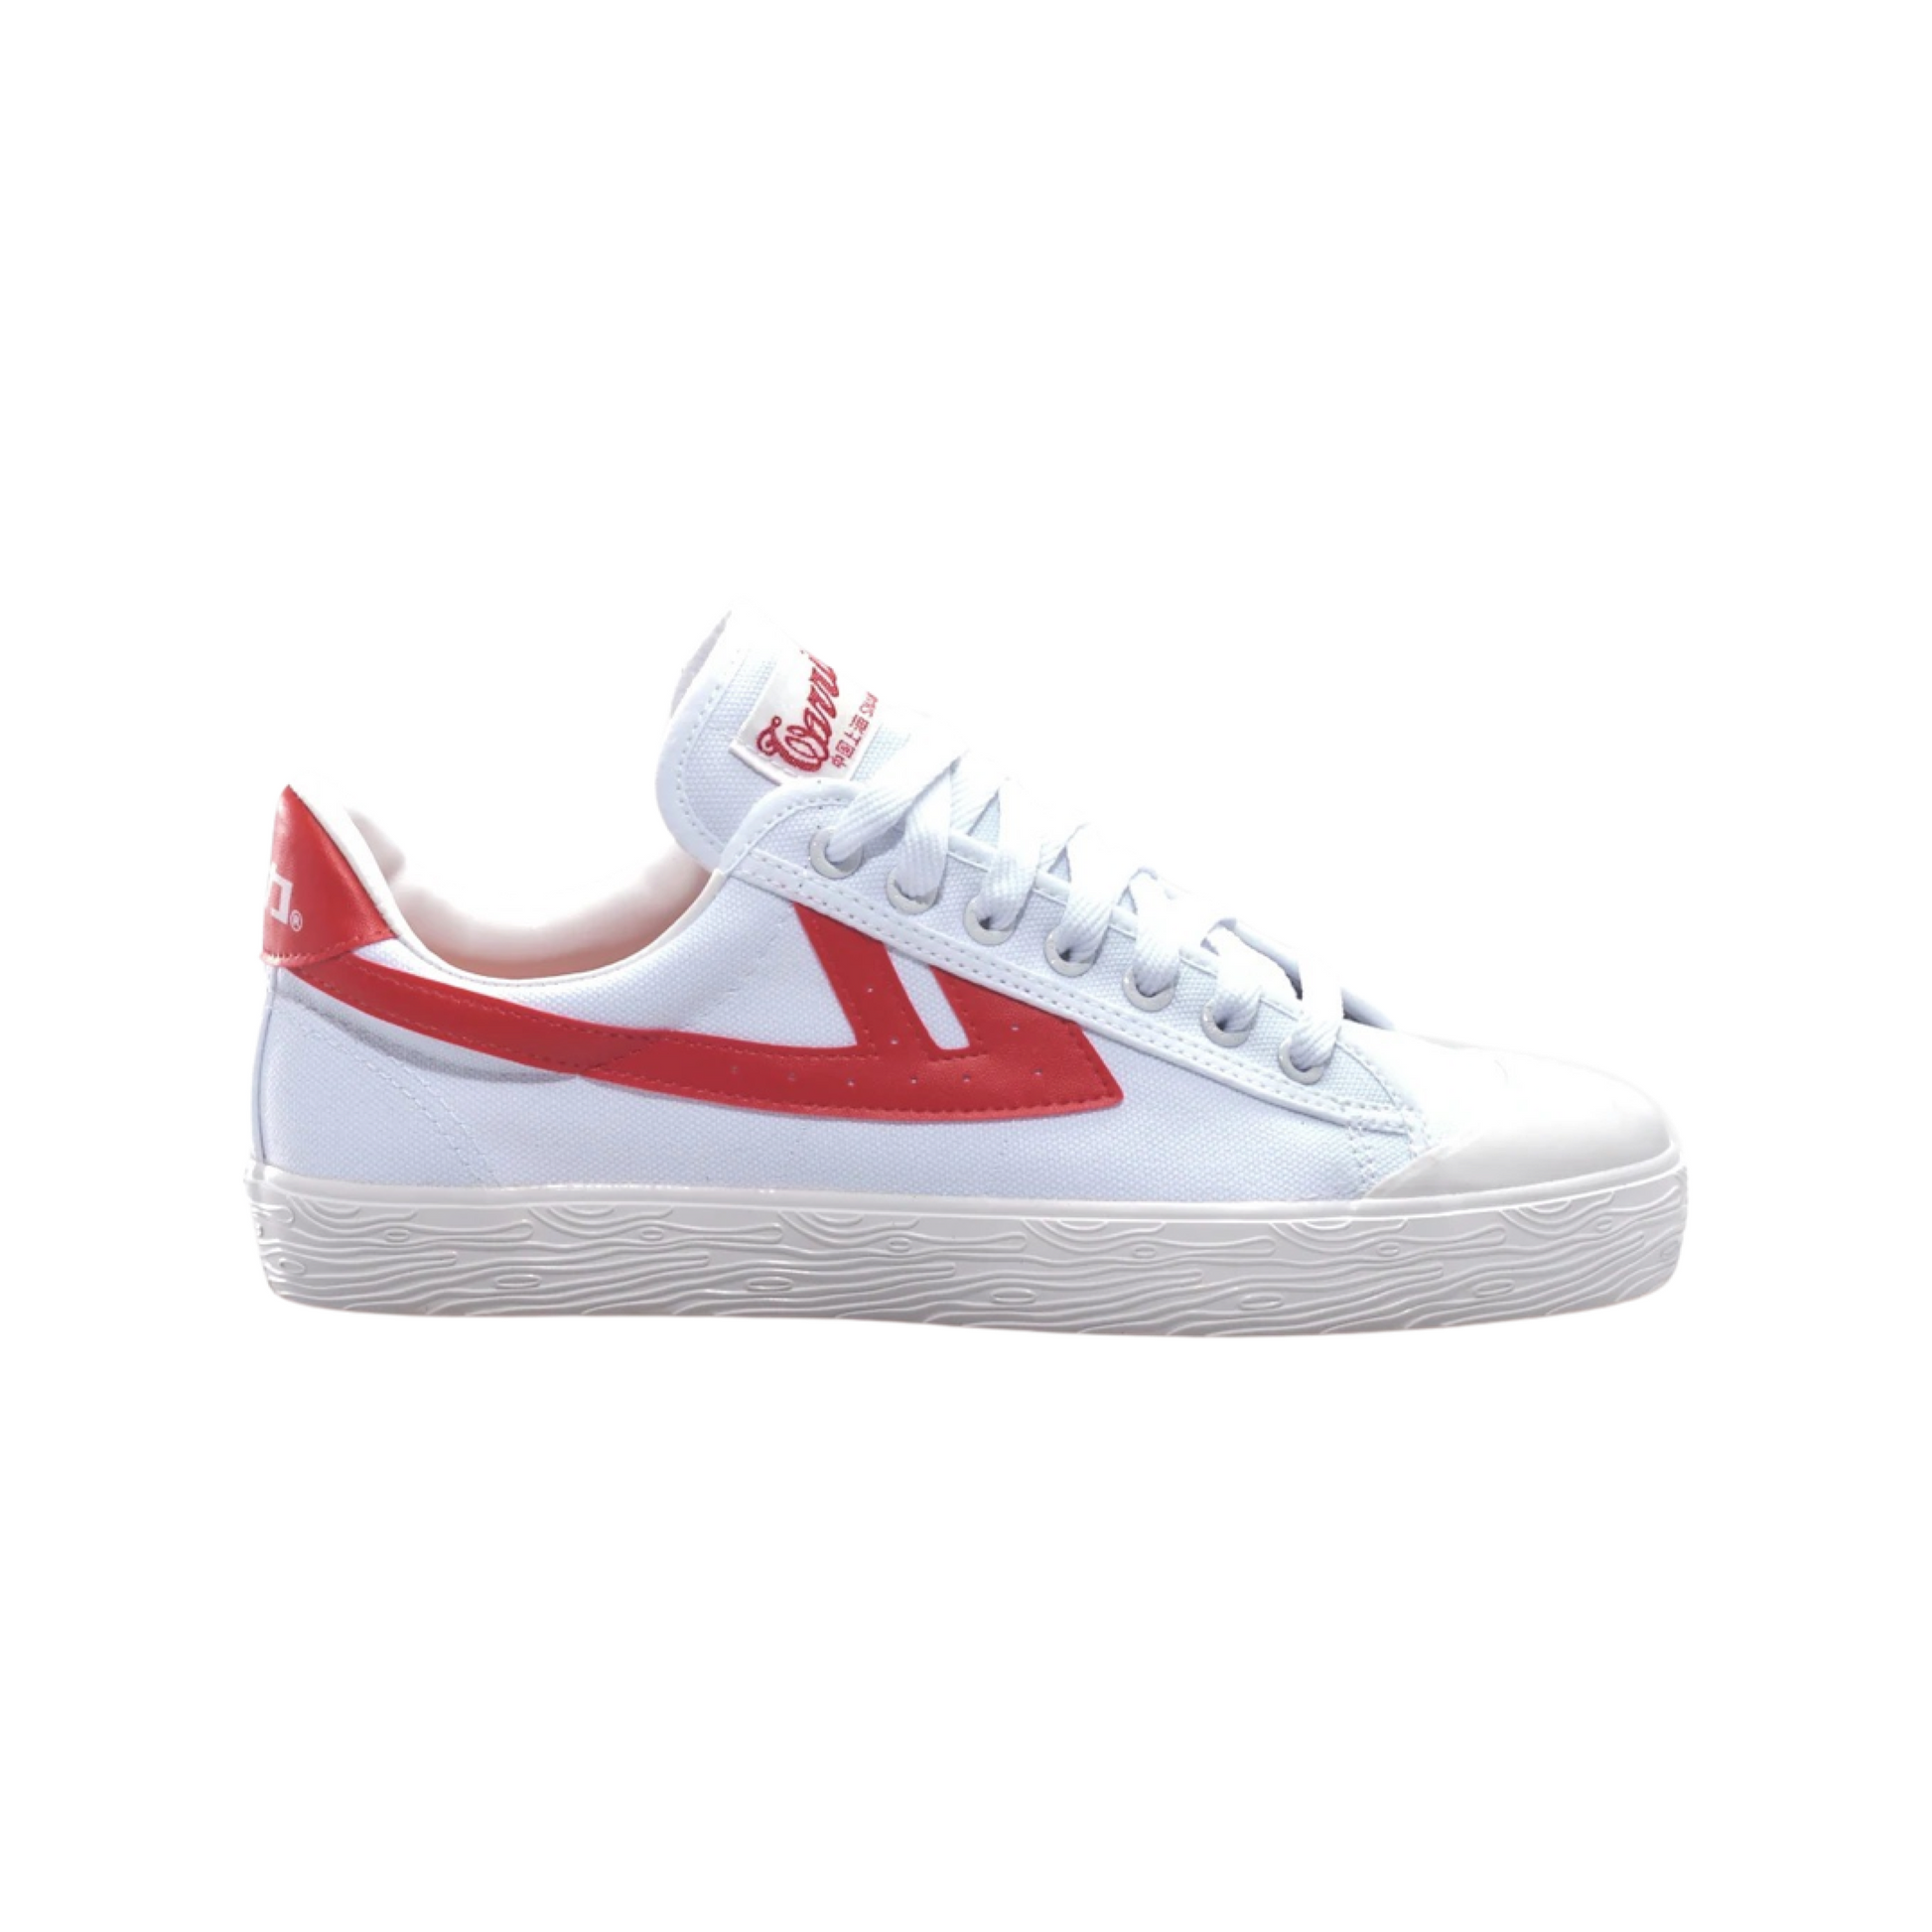 WB-1 - White/Red